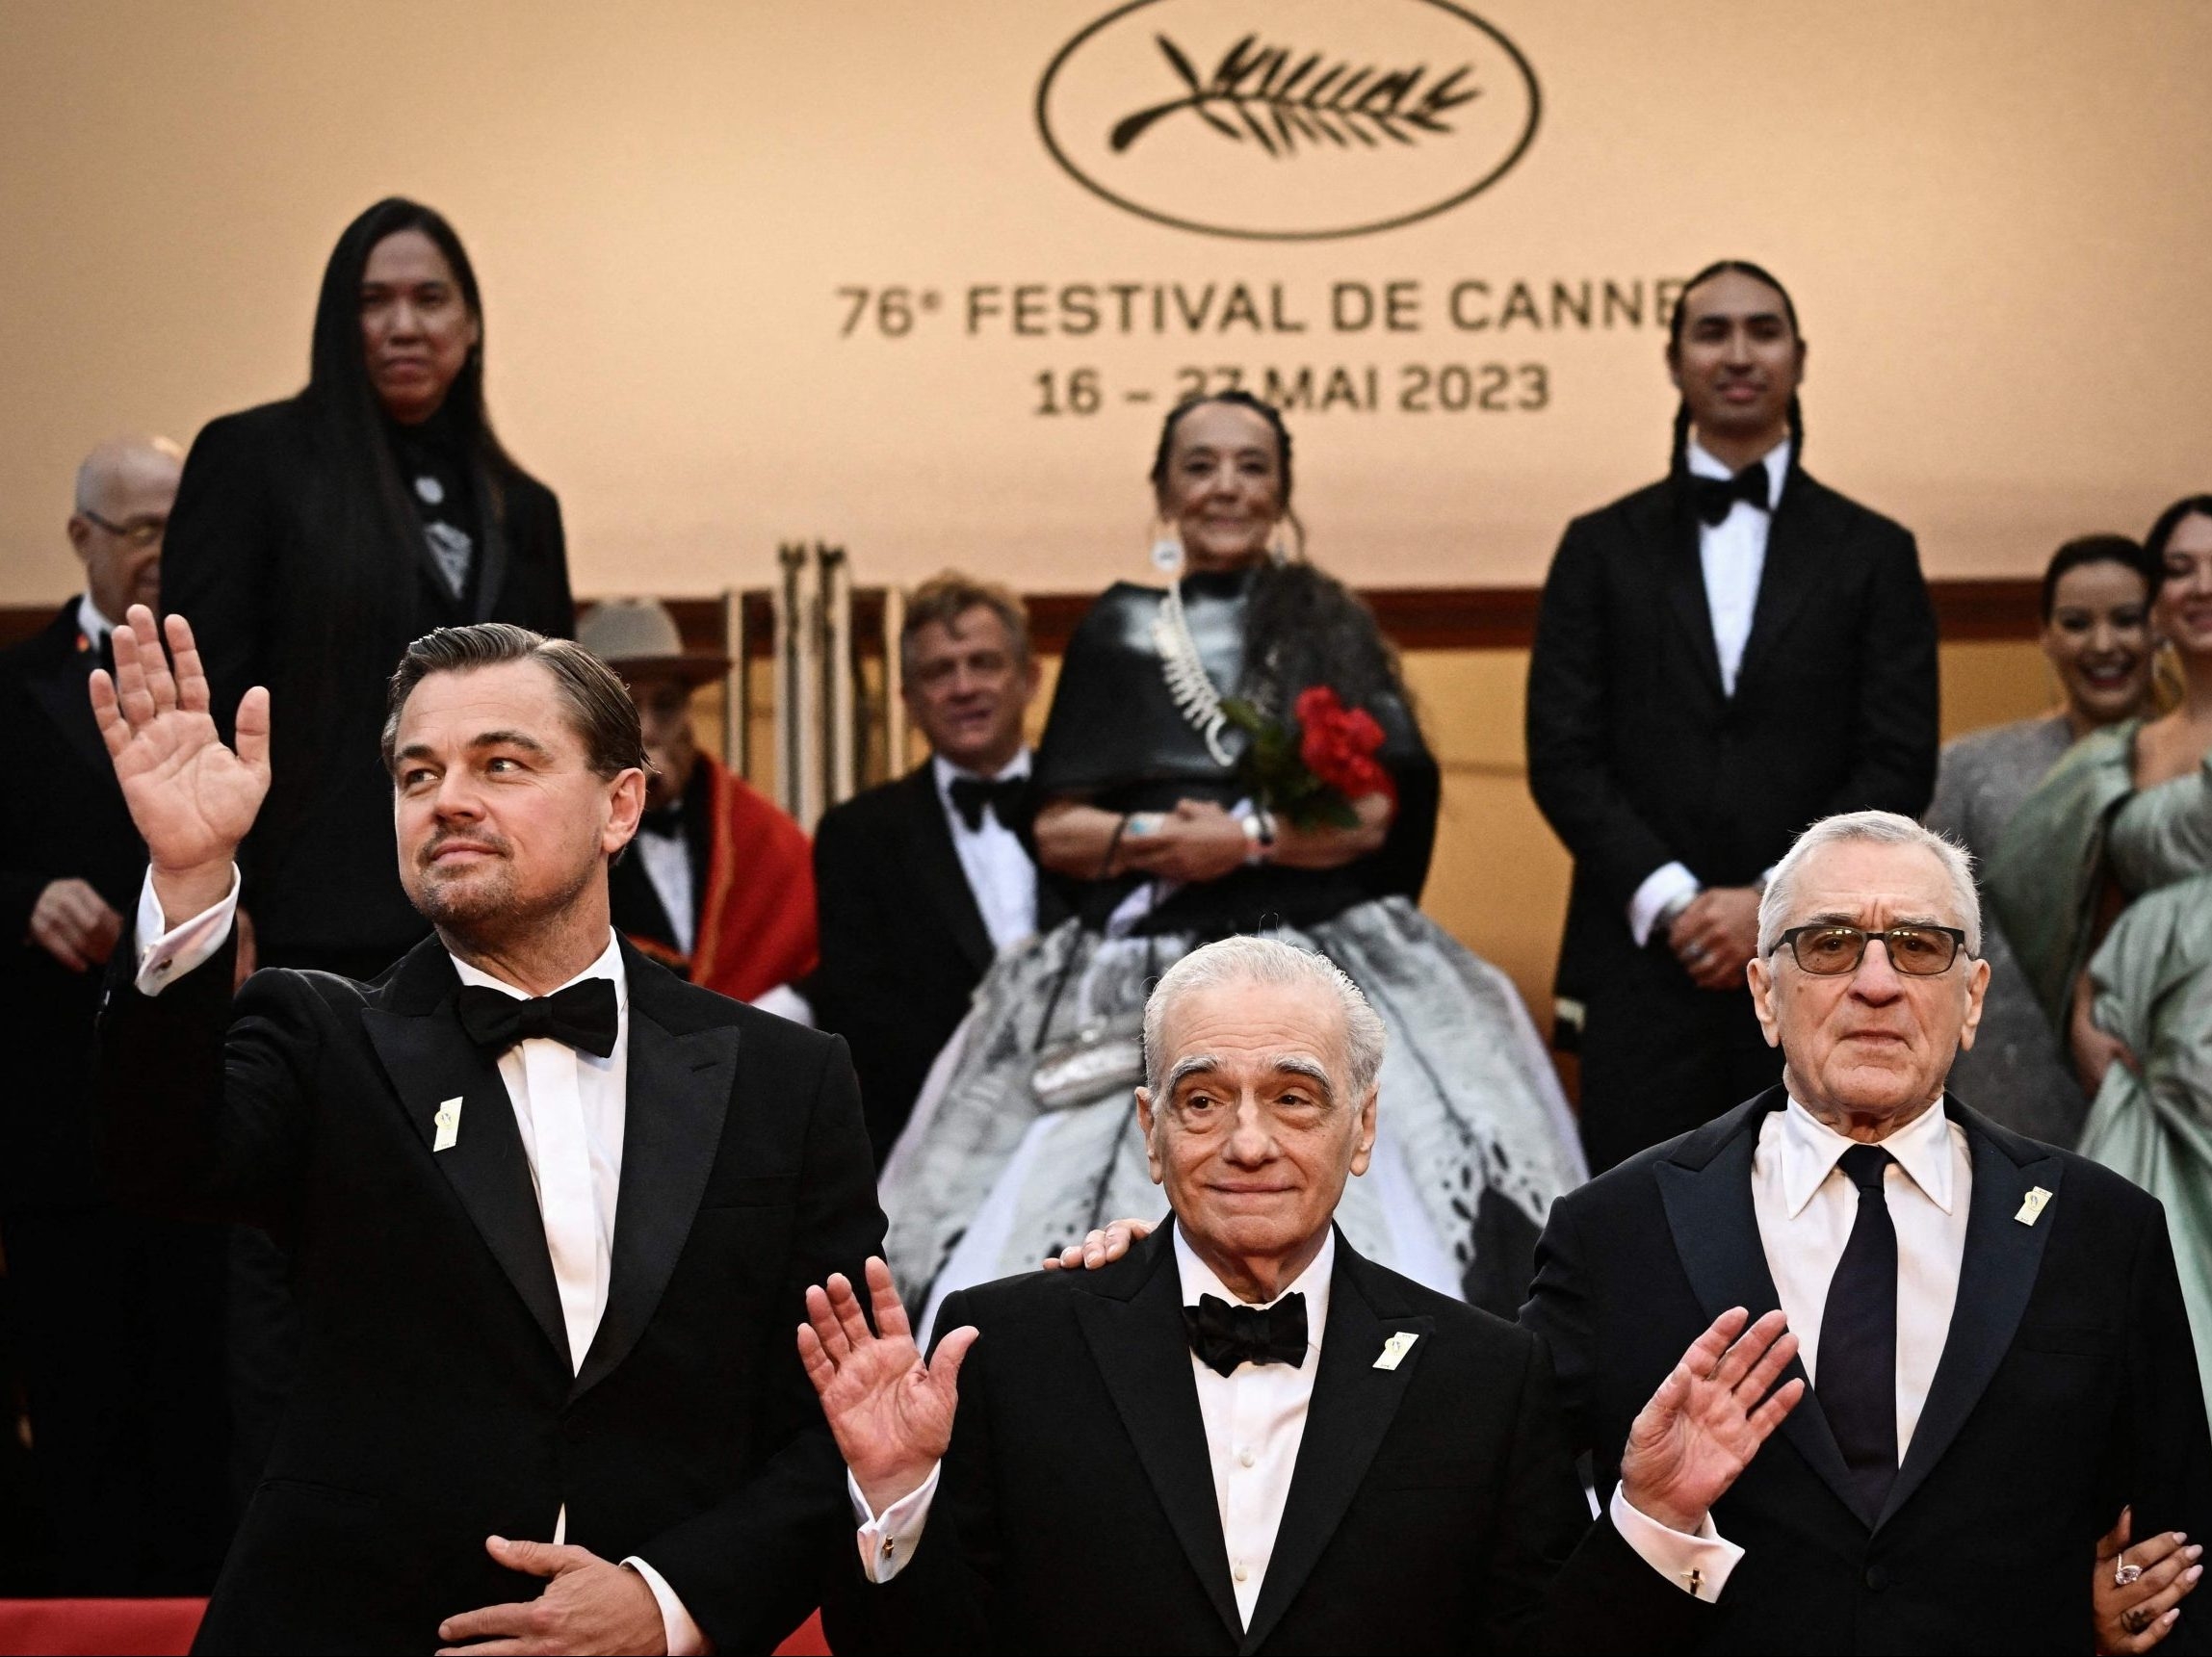 Scorsese debuts 'Killers of the Flower Moon' in Cannes to applause